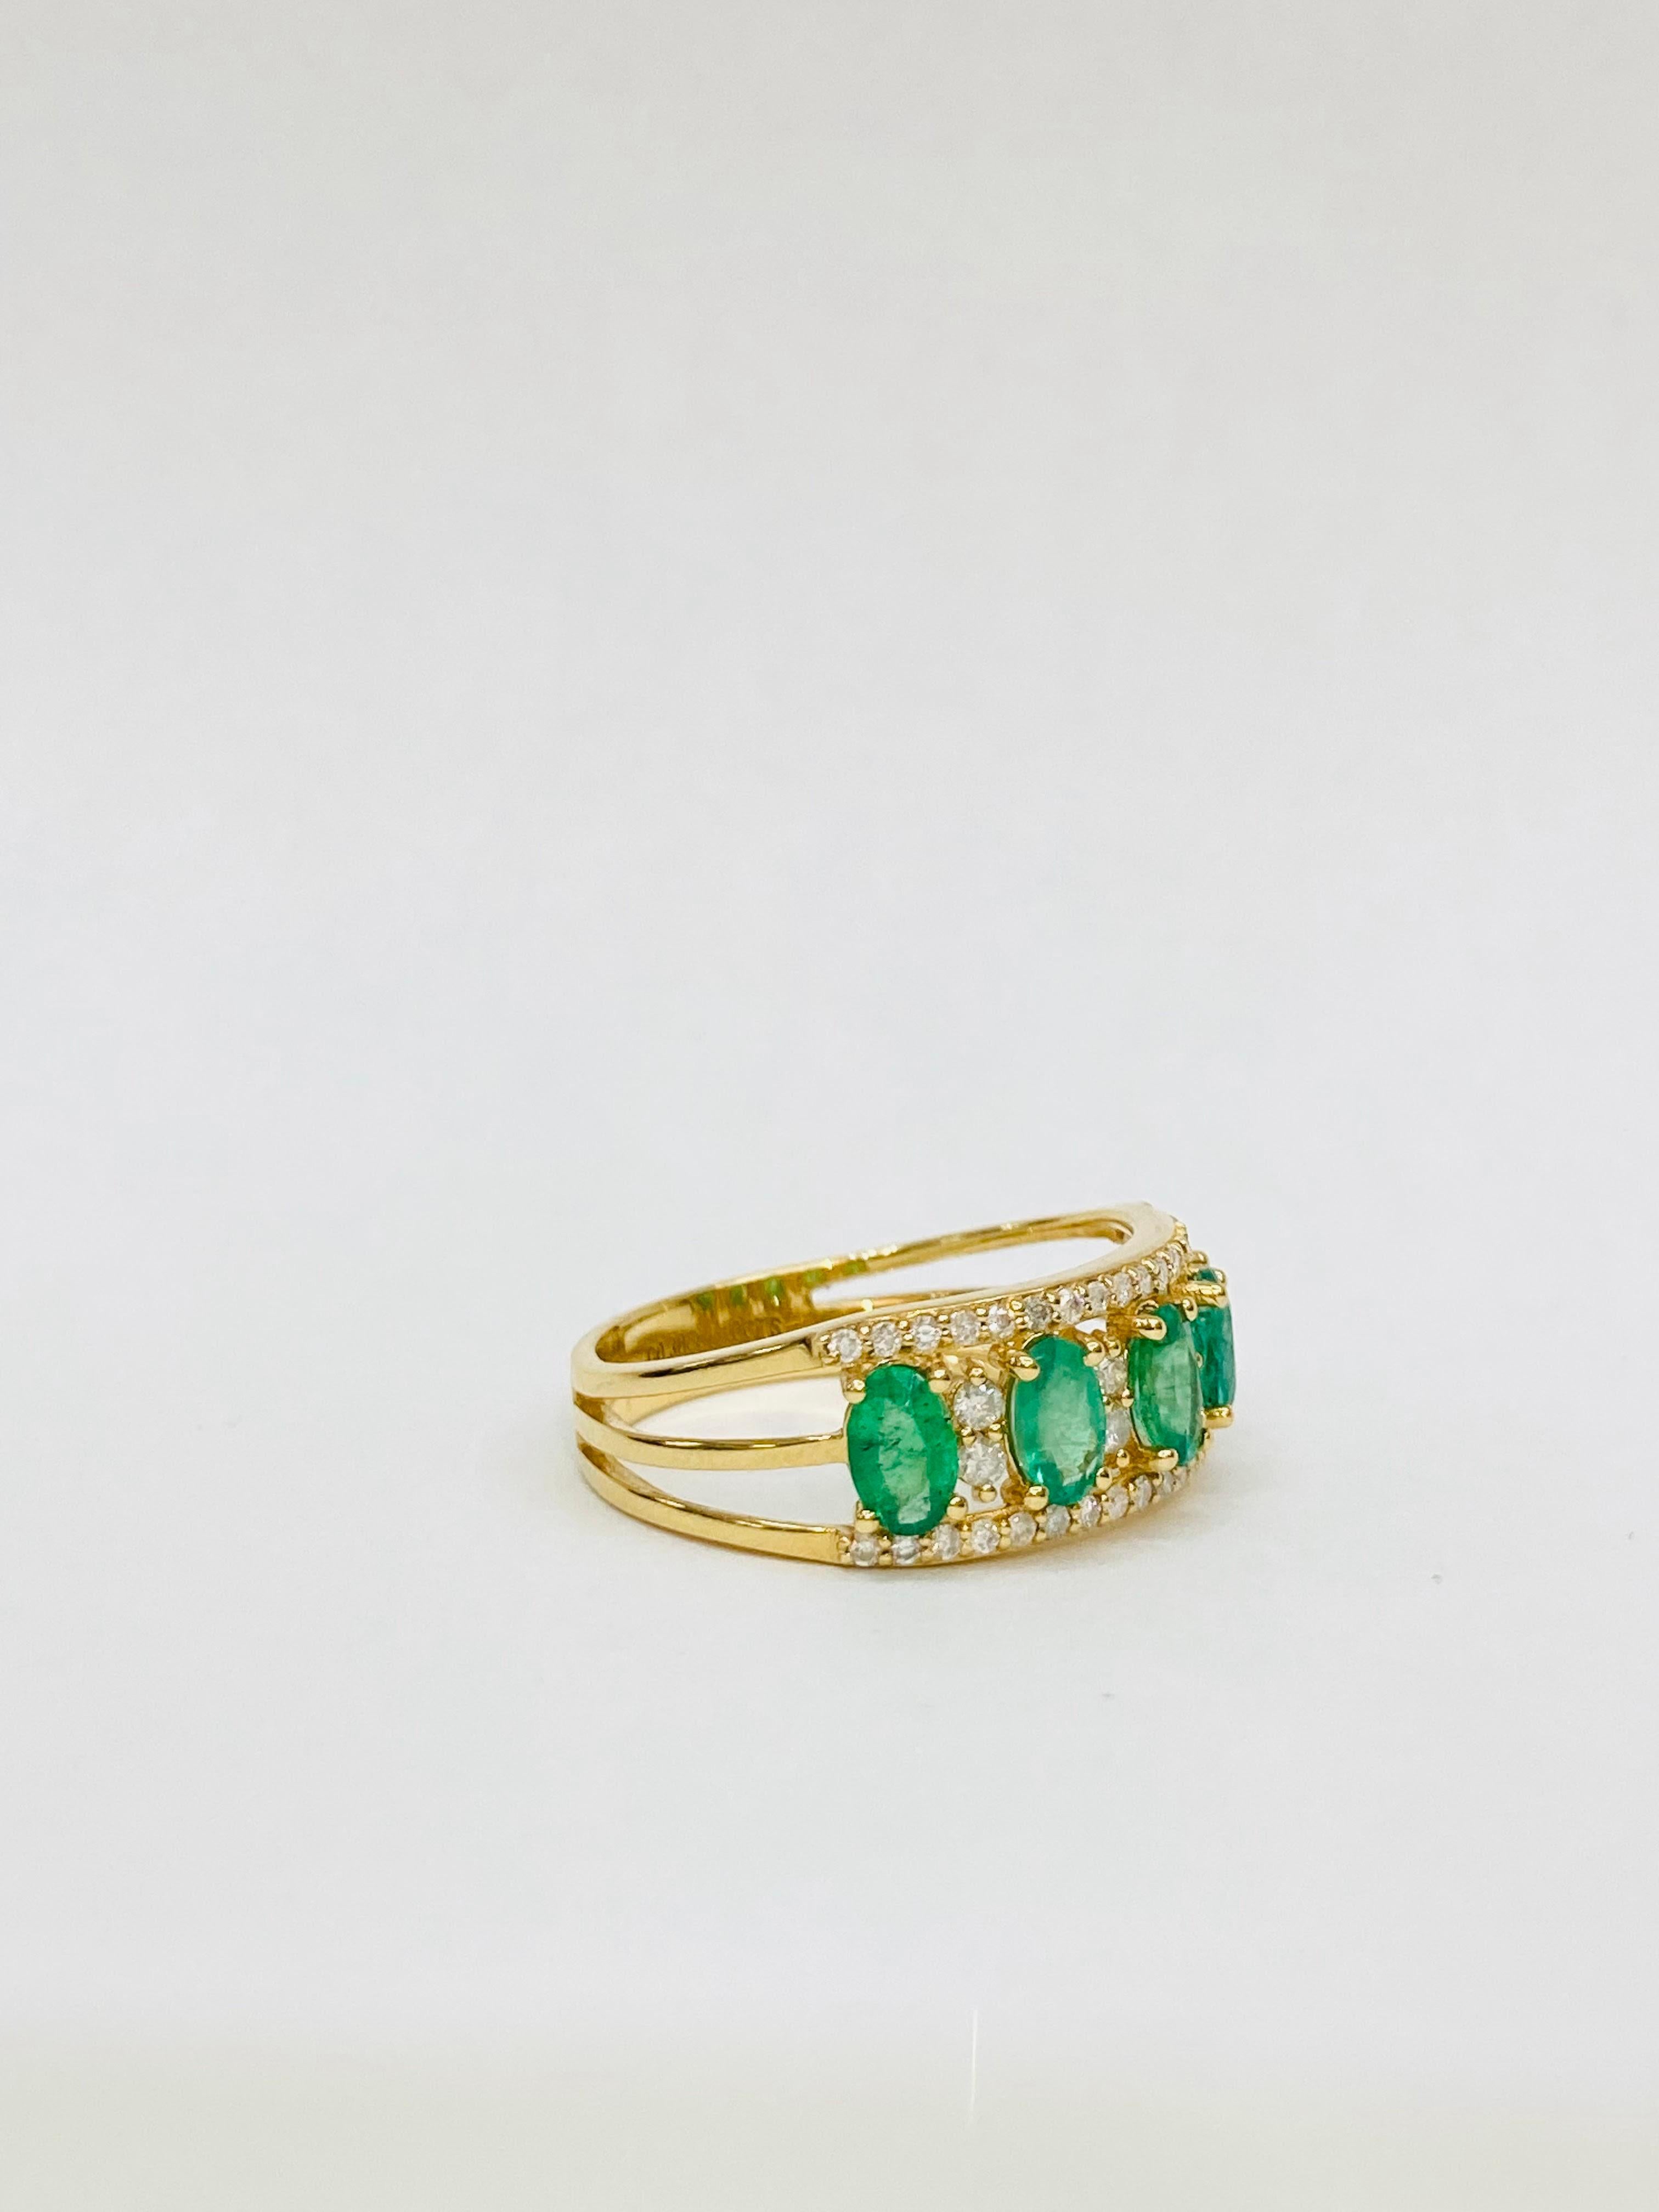 Bochic “Retro Vintage” Emerald  & Diamond  18K Gold & Eternity Cluster Ring.
Natural Green Emerald  from Zambia 1.40 Carat 
Oval Shapes 
Diamonds 0.35 Carat 
Round Brilliant
F color 
VS clarity 
18K Yellow Gold
3.50 Gram

This Ring is from the